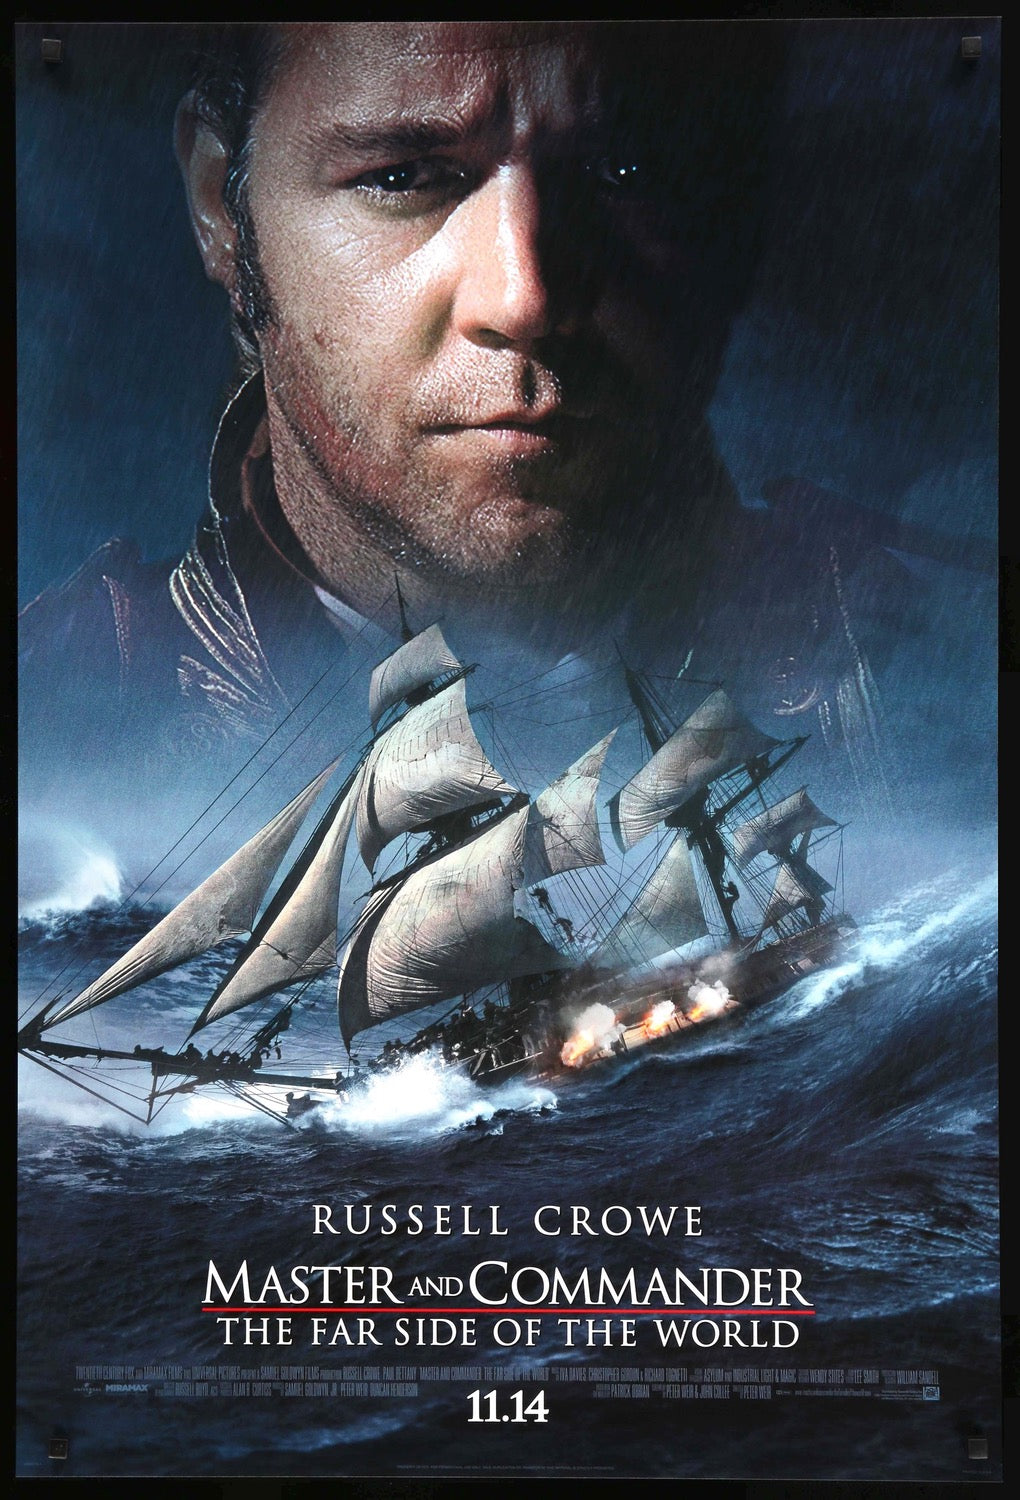 Master and Commander: The Far Side of the World (2003) original movie poster for sale at Original Film Art